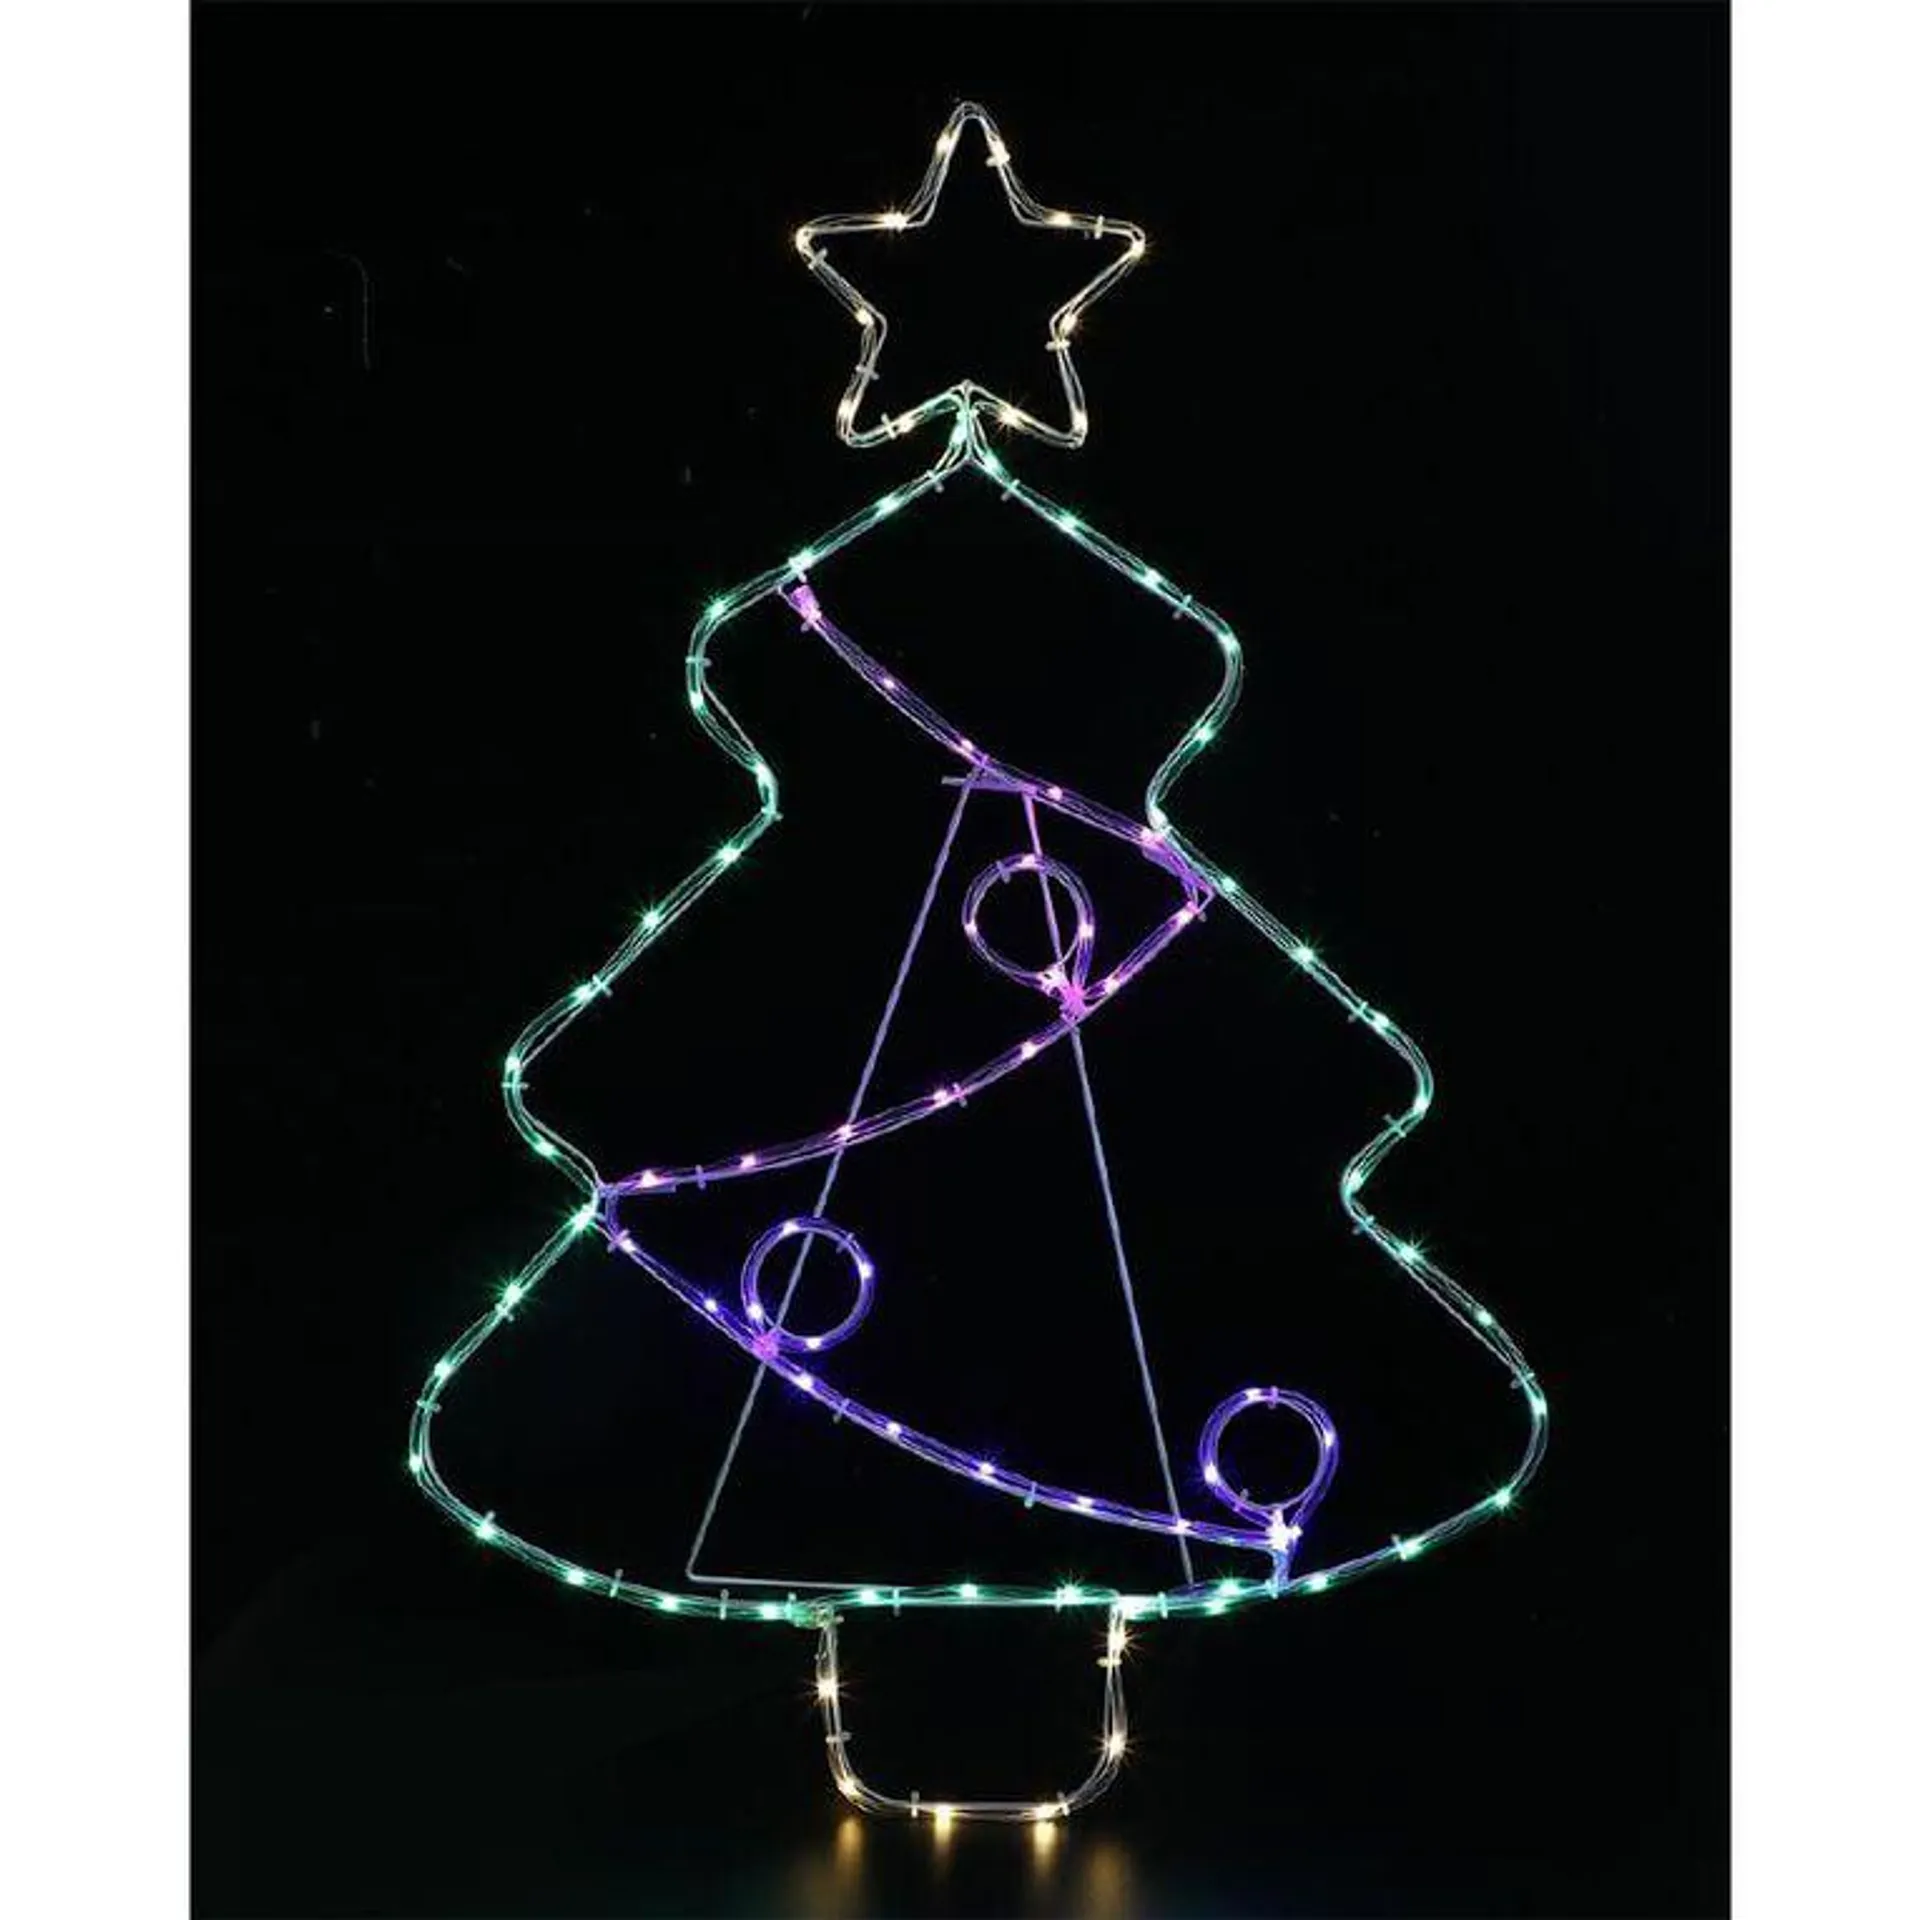 Wonderland Solar Tree With Star Silver Wire Multi-Coloured 83cm 92 LED